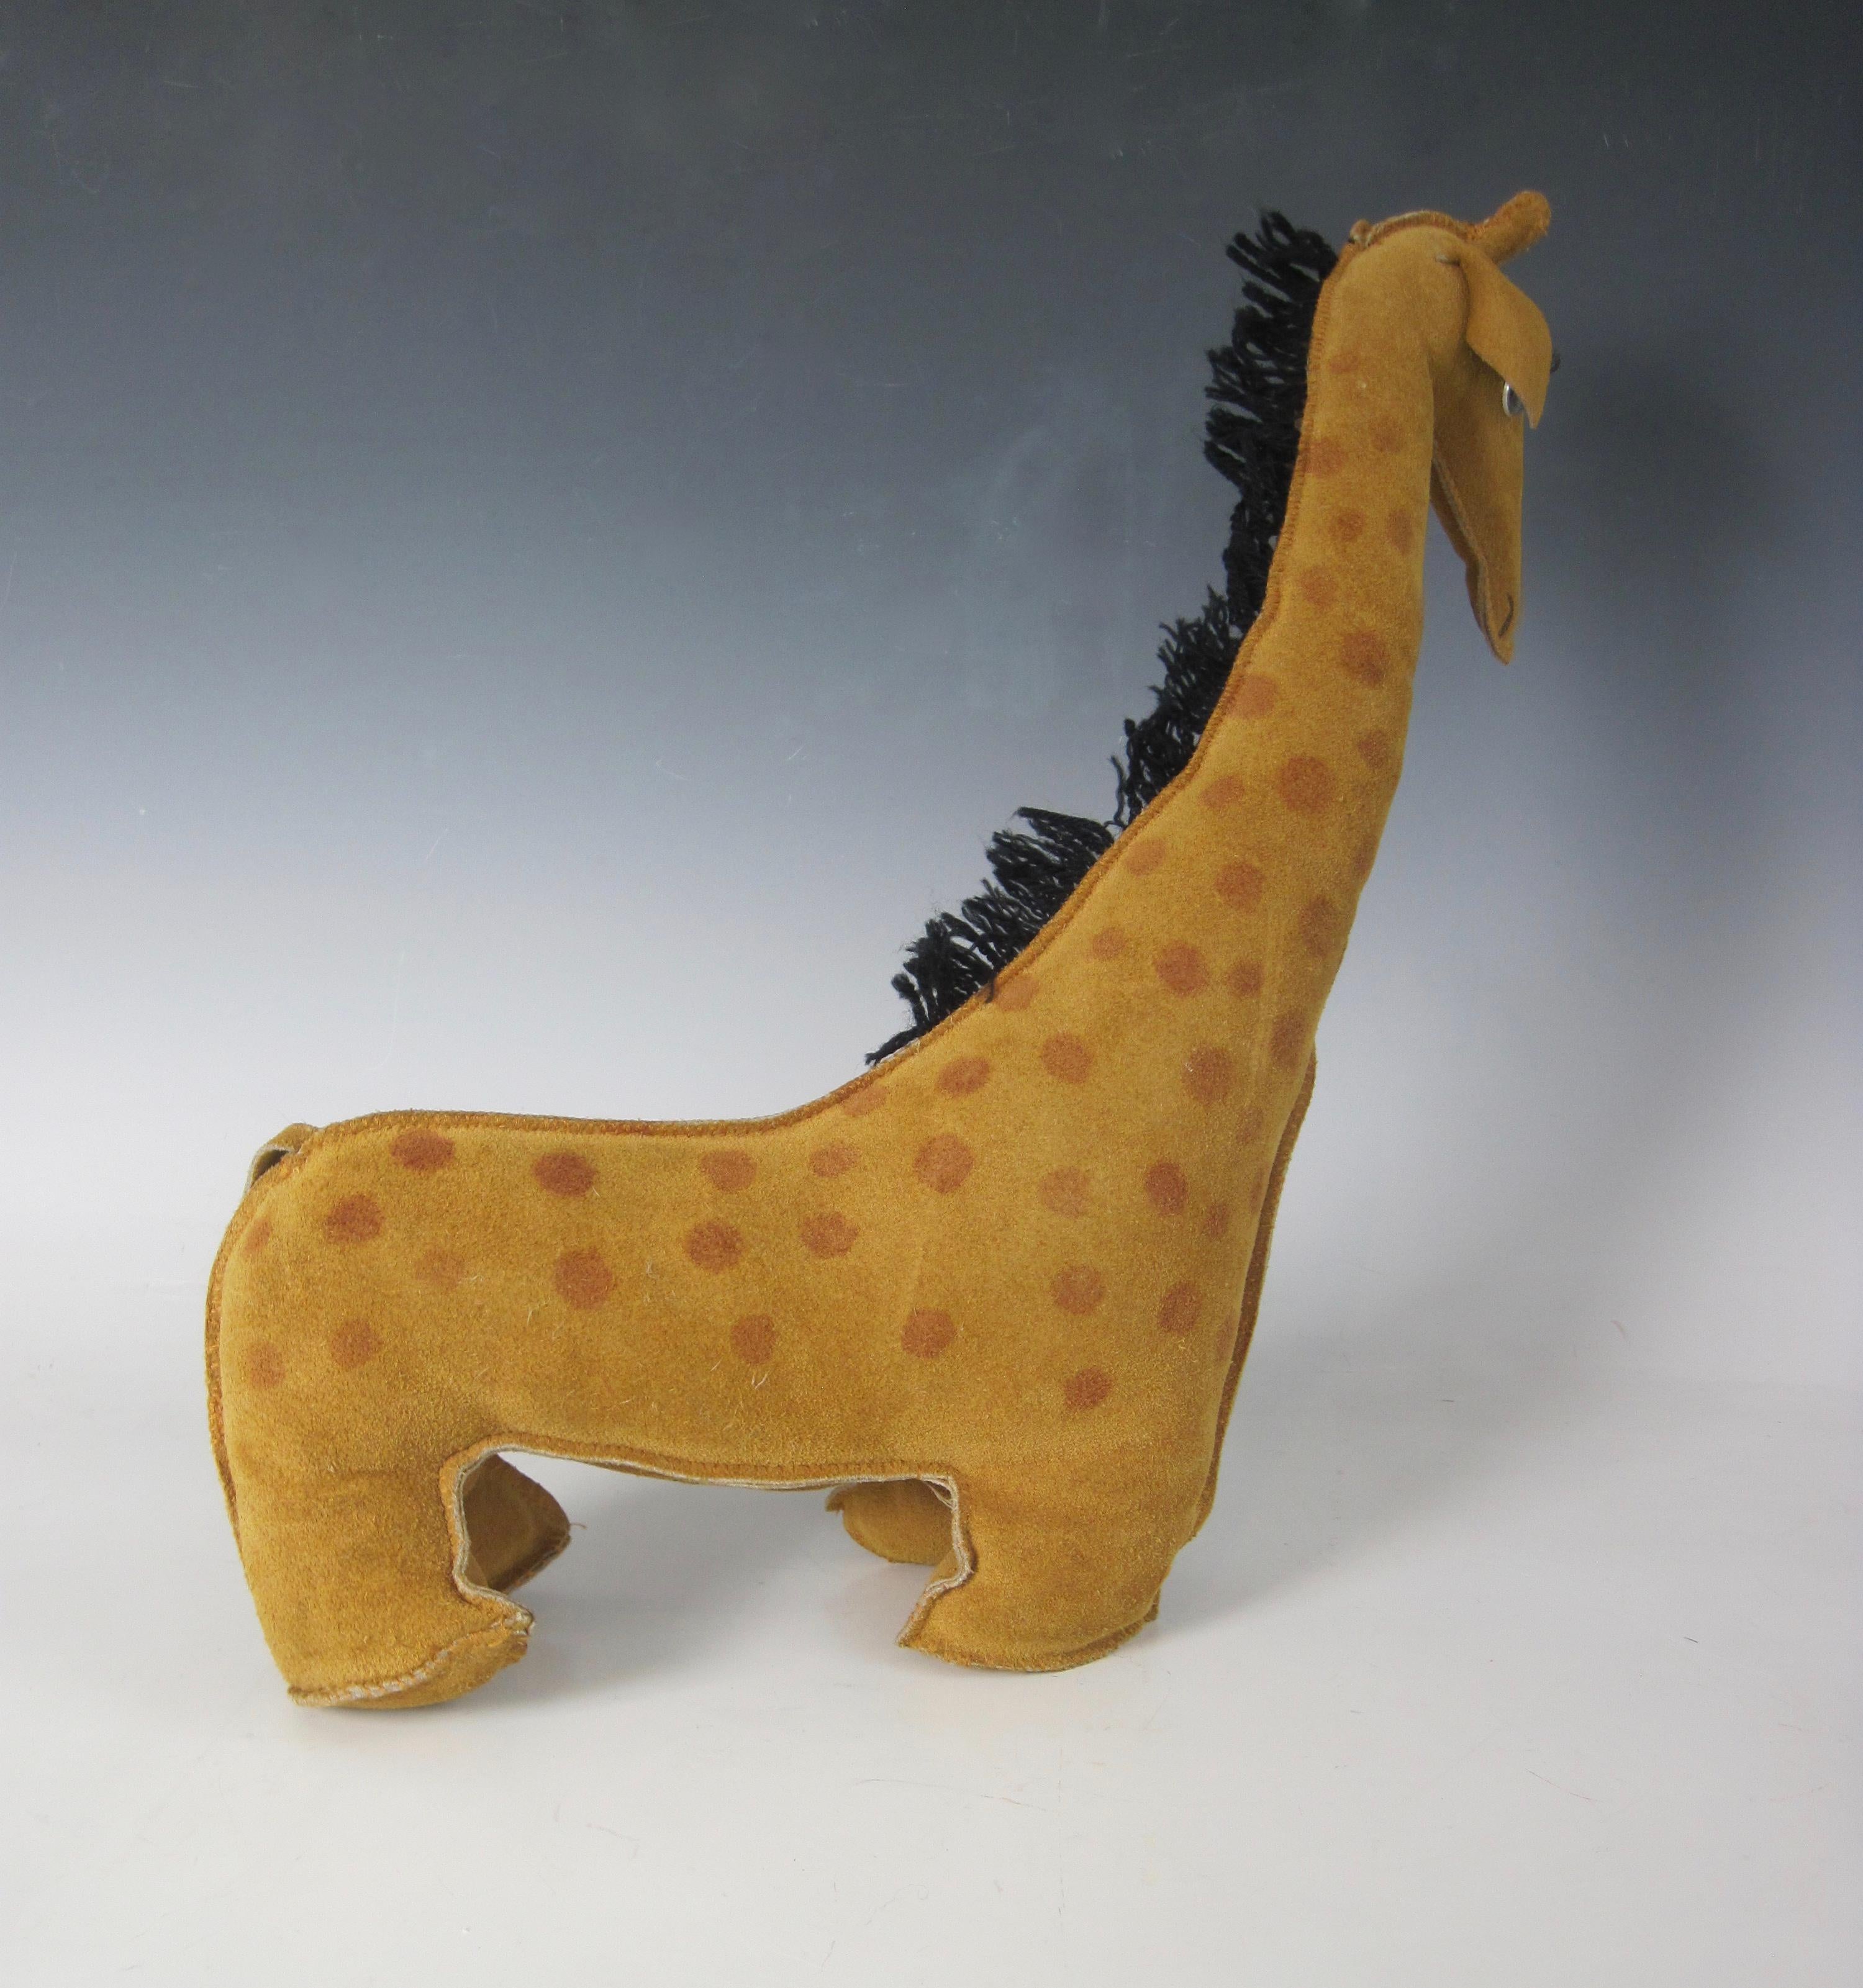 Vintage 1970s tan suede leather spotted Giraffe stuffed animal complete with sewn-on plastic eyes and lashes and a mane made of black yarn. All seaming is tight. No stains.